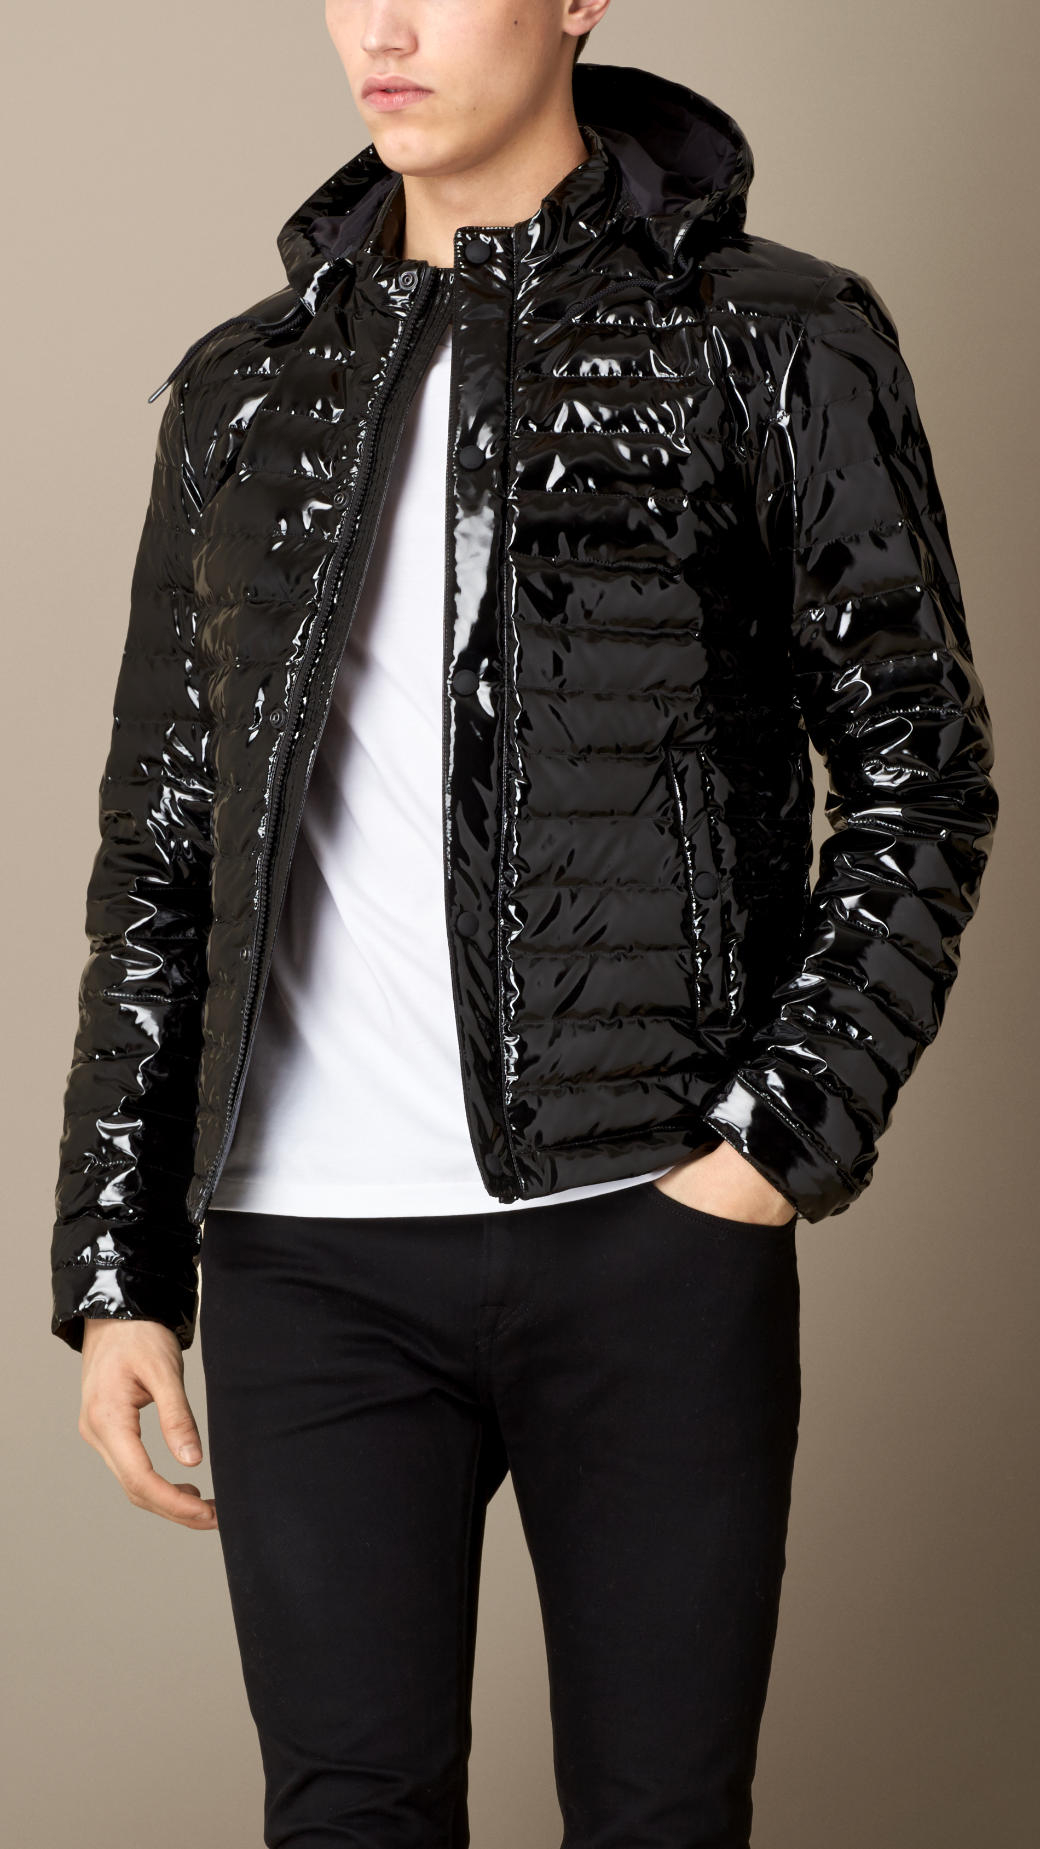 Burberry Down-Filled High-Gloss Puffer Jacket in Black for Men - Lyst